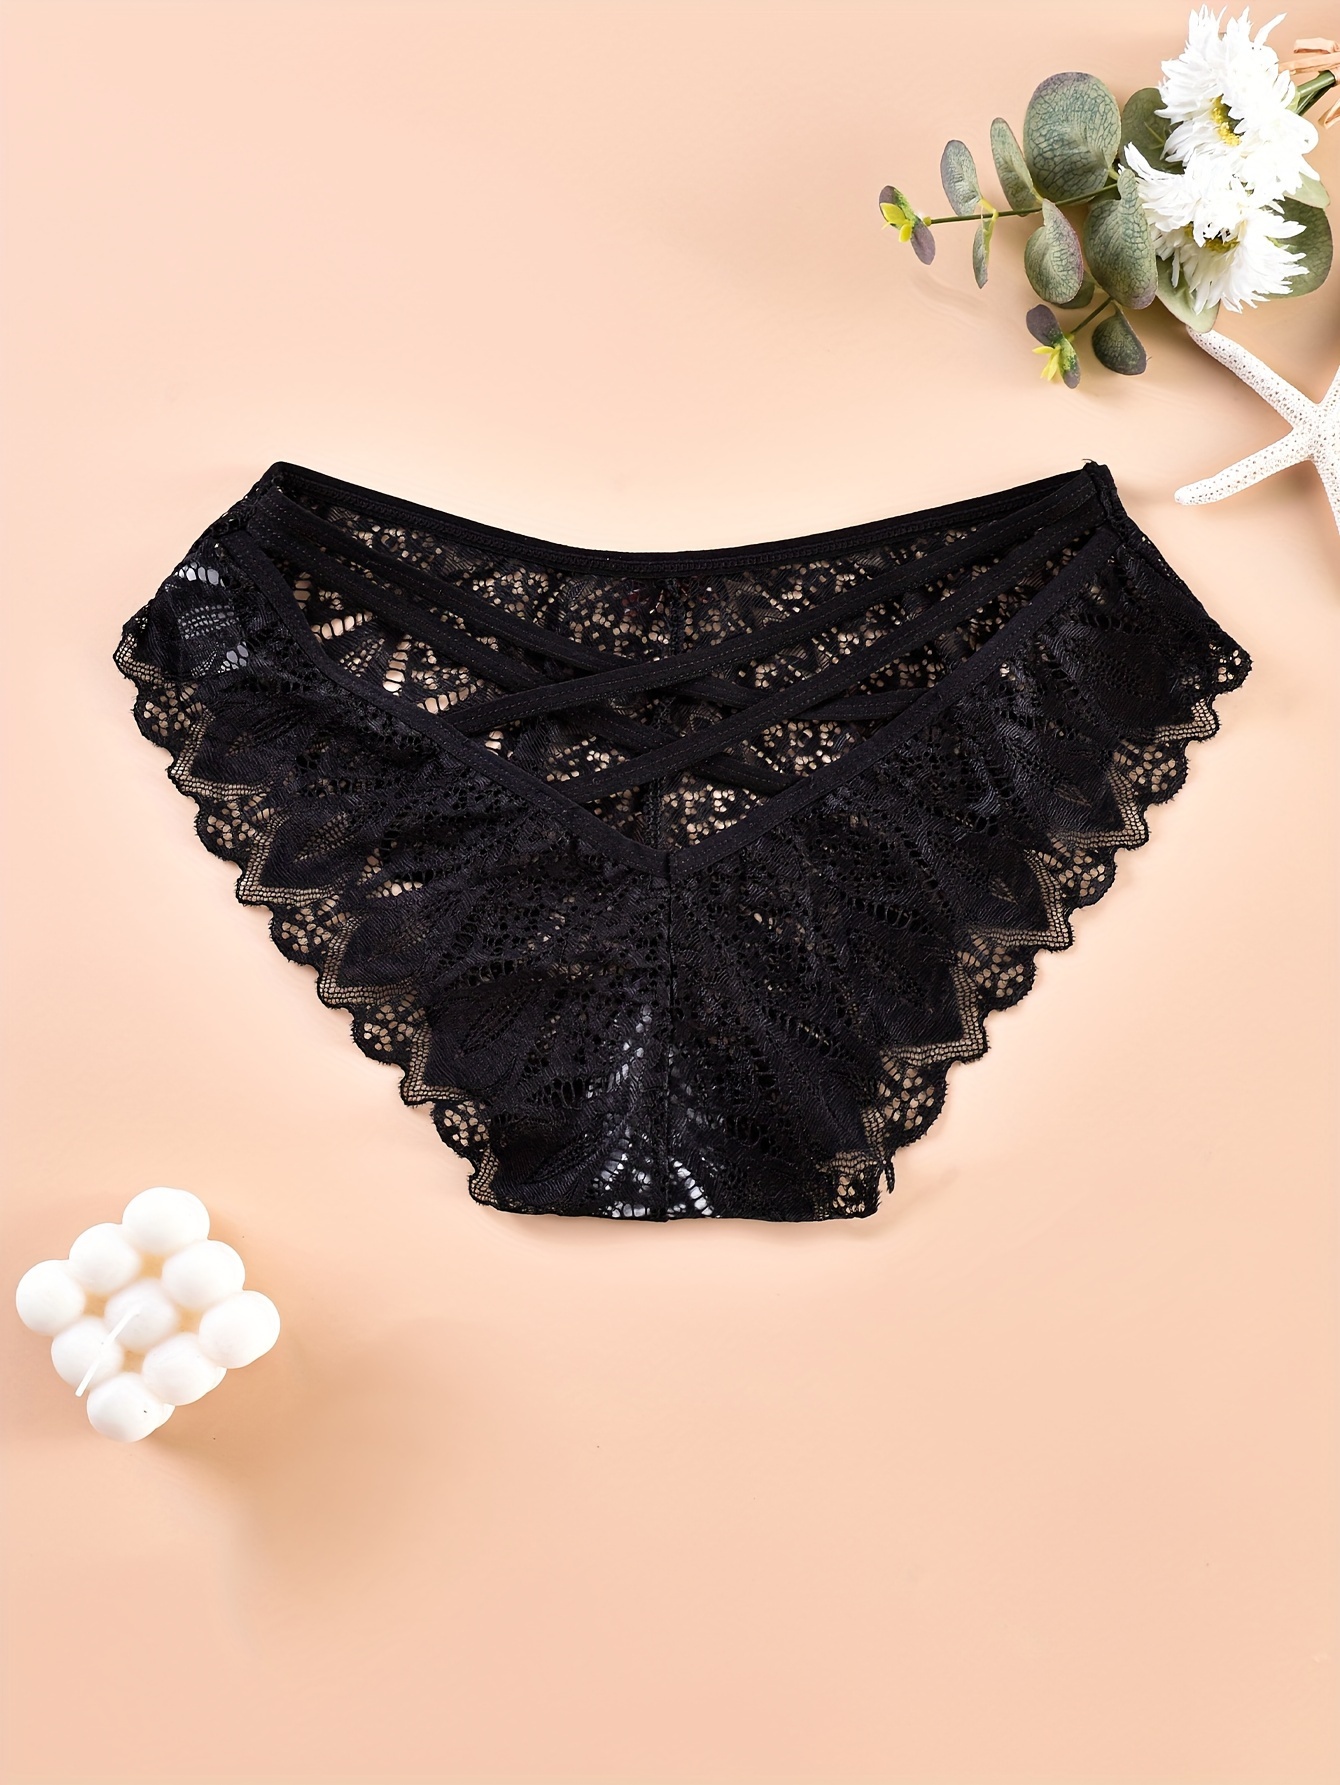 Sexy Lace Panties, Strappy Low Cut Boyshort Panties With Bow Tie